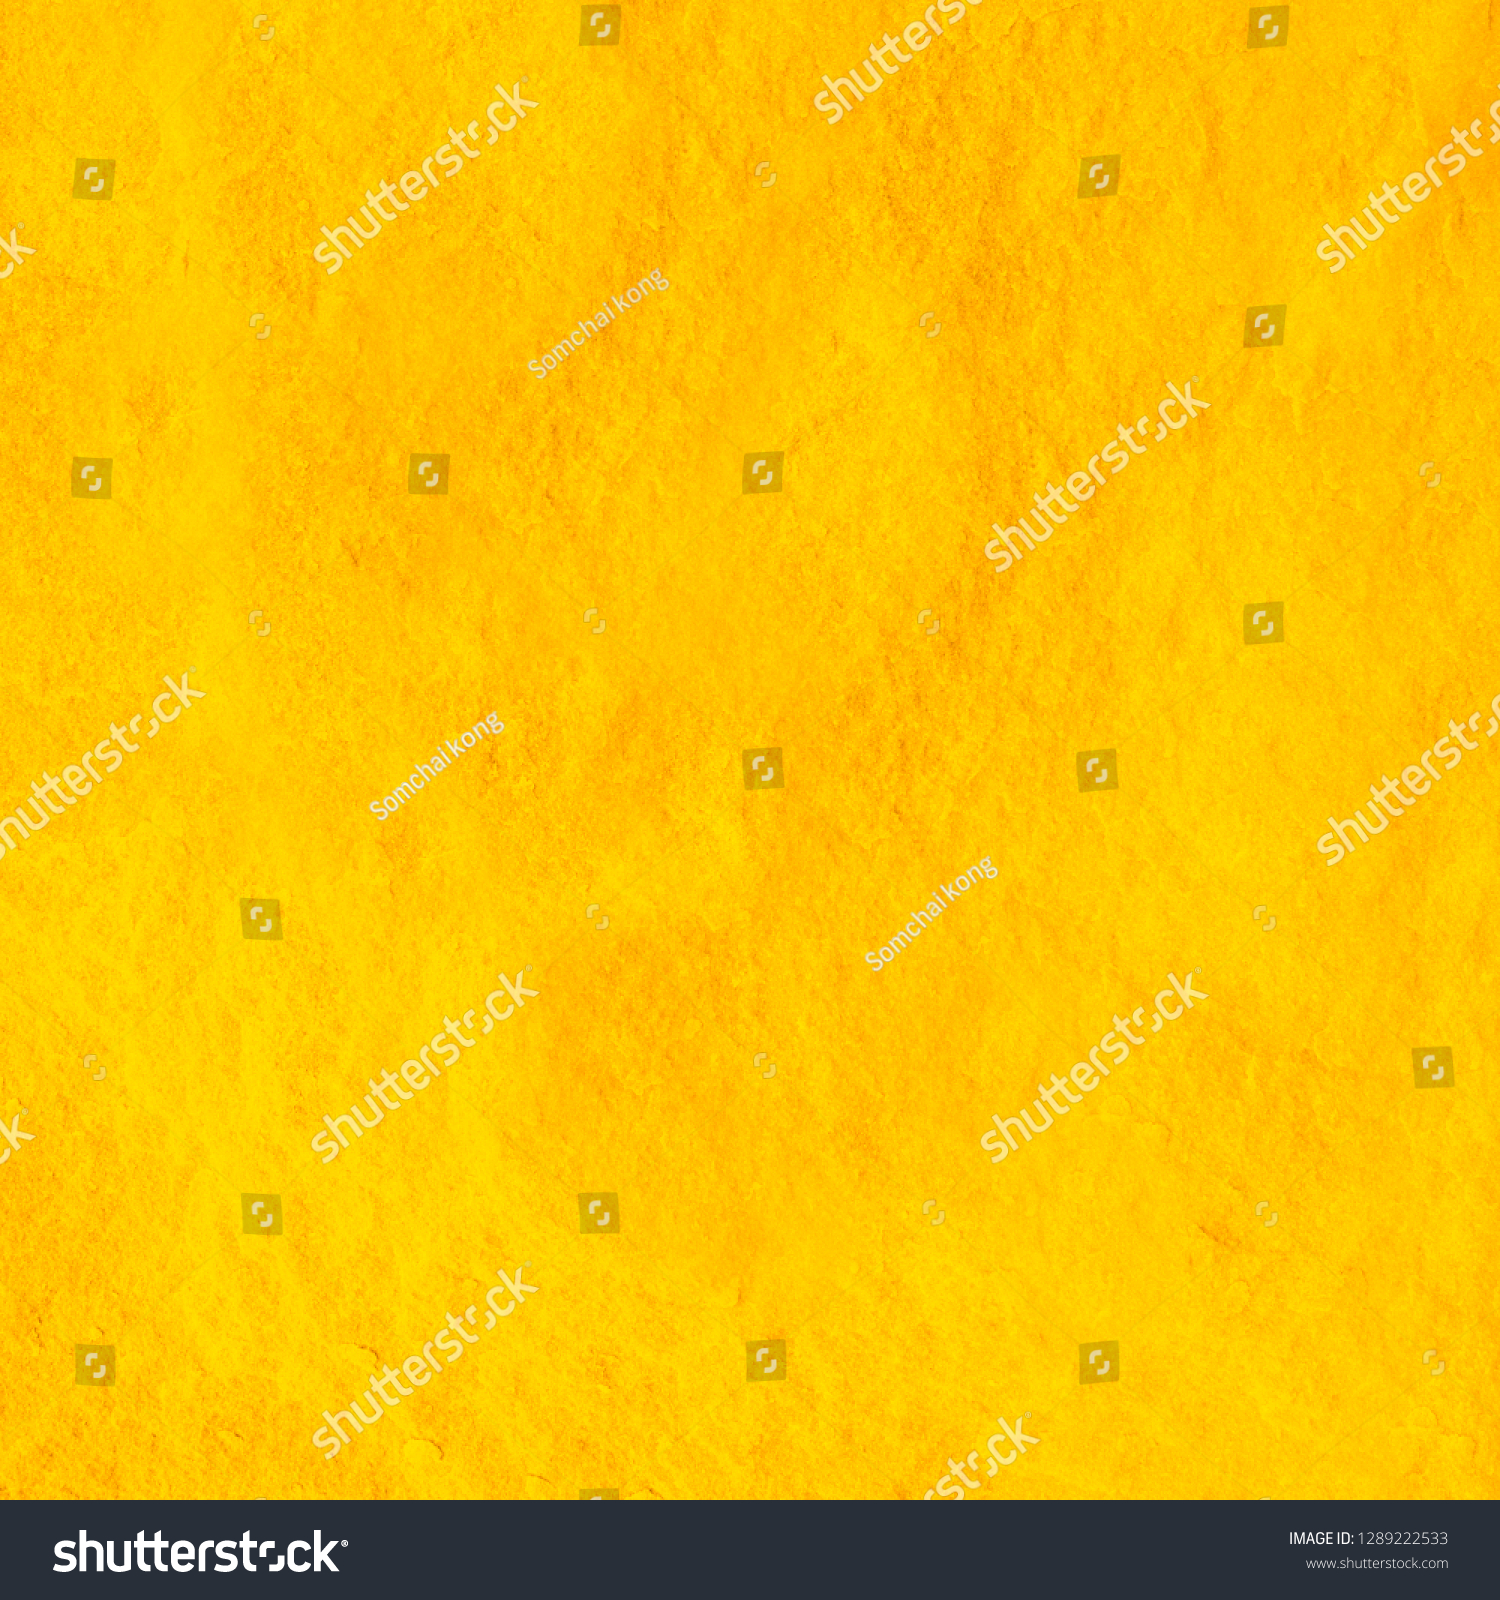 Gold or foil wall texture backdrop design #1289222533